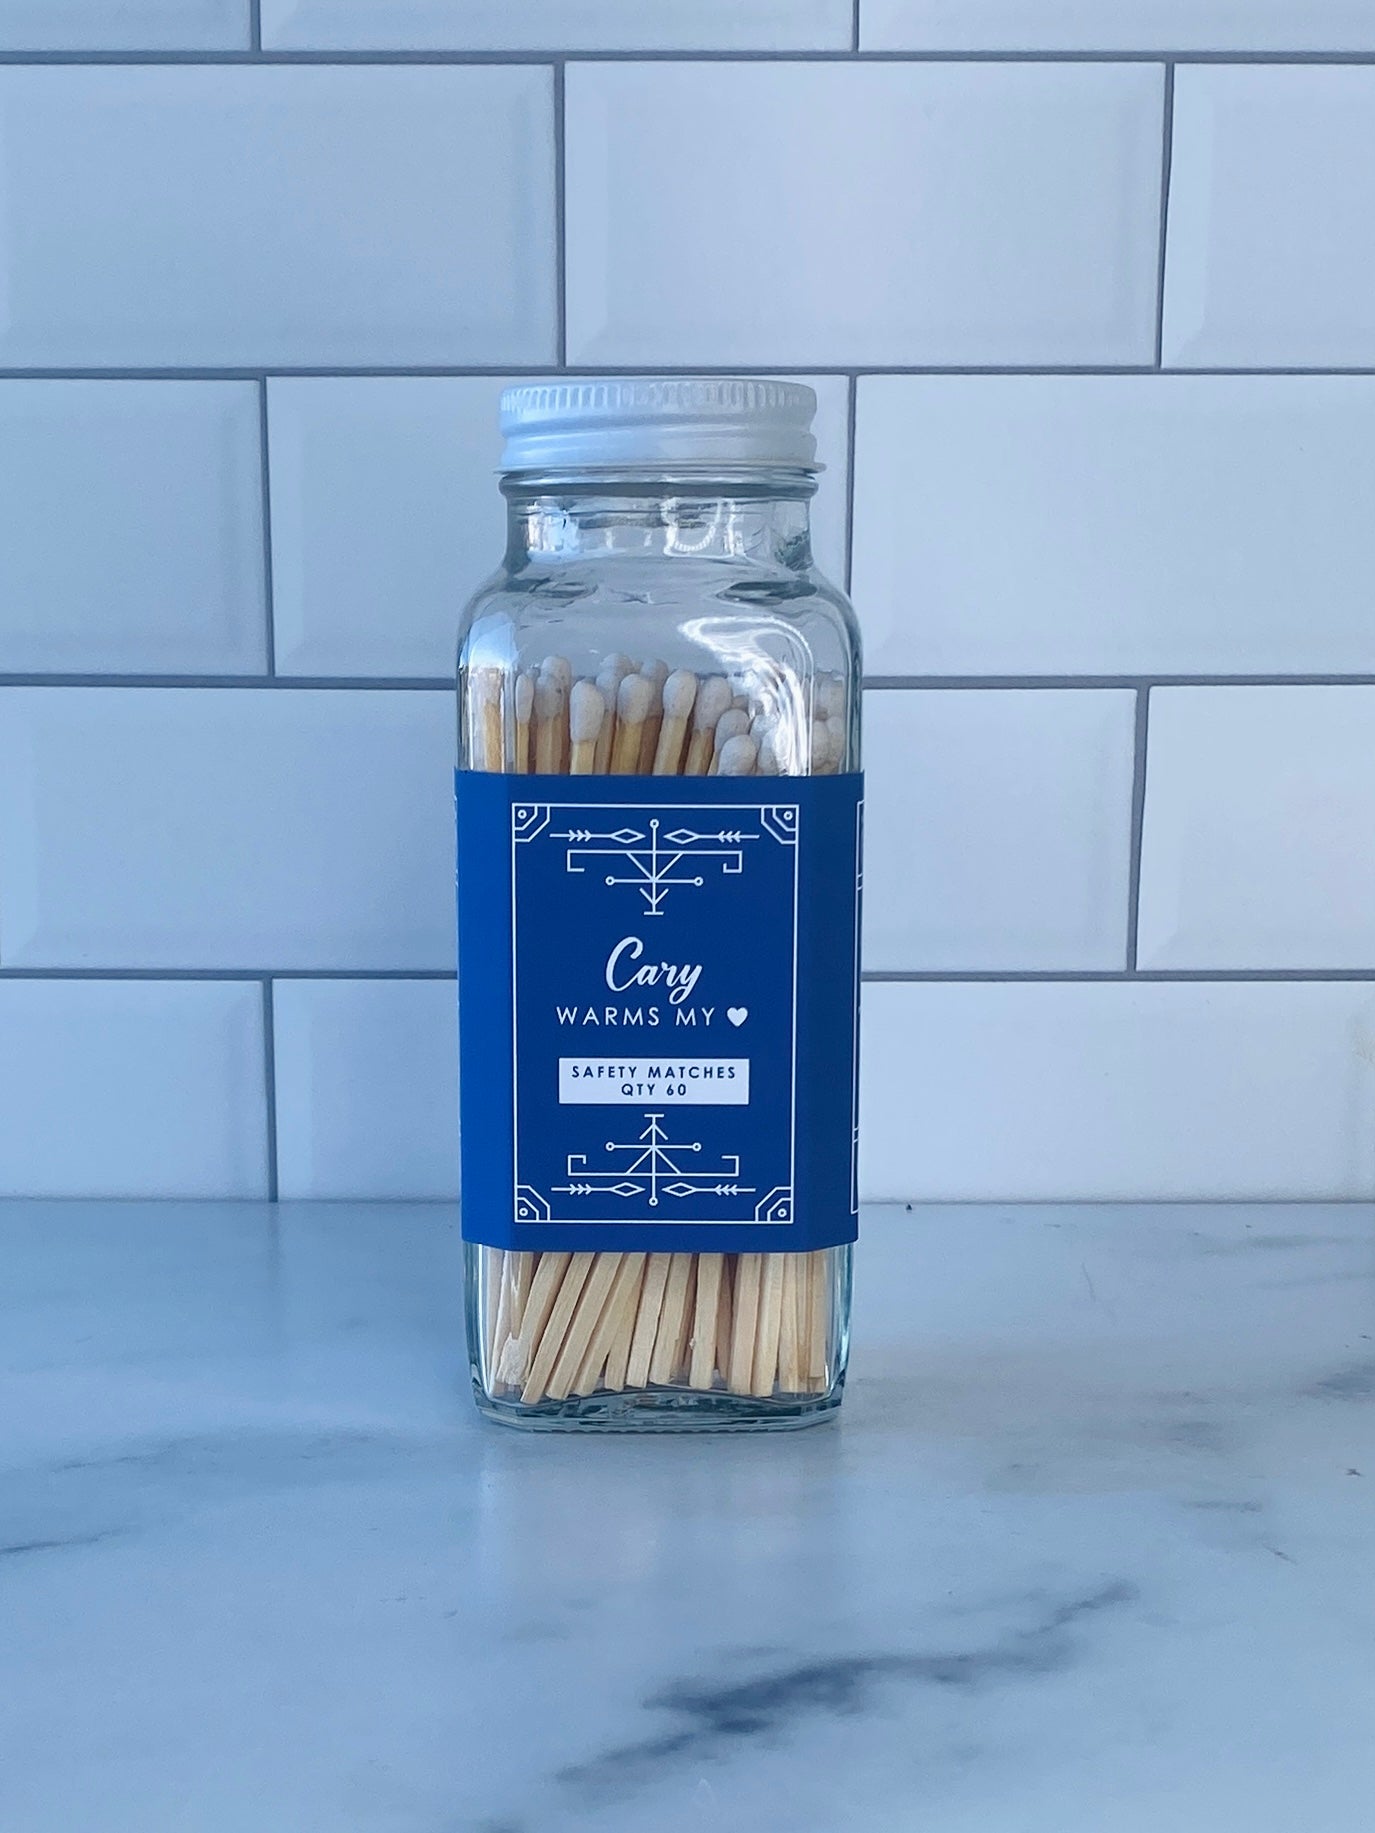 Cary Safety Matches - Cary Warms My Heart